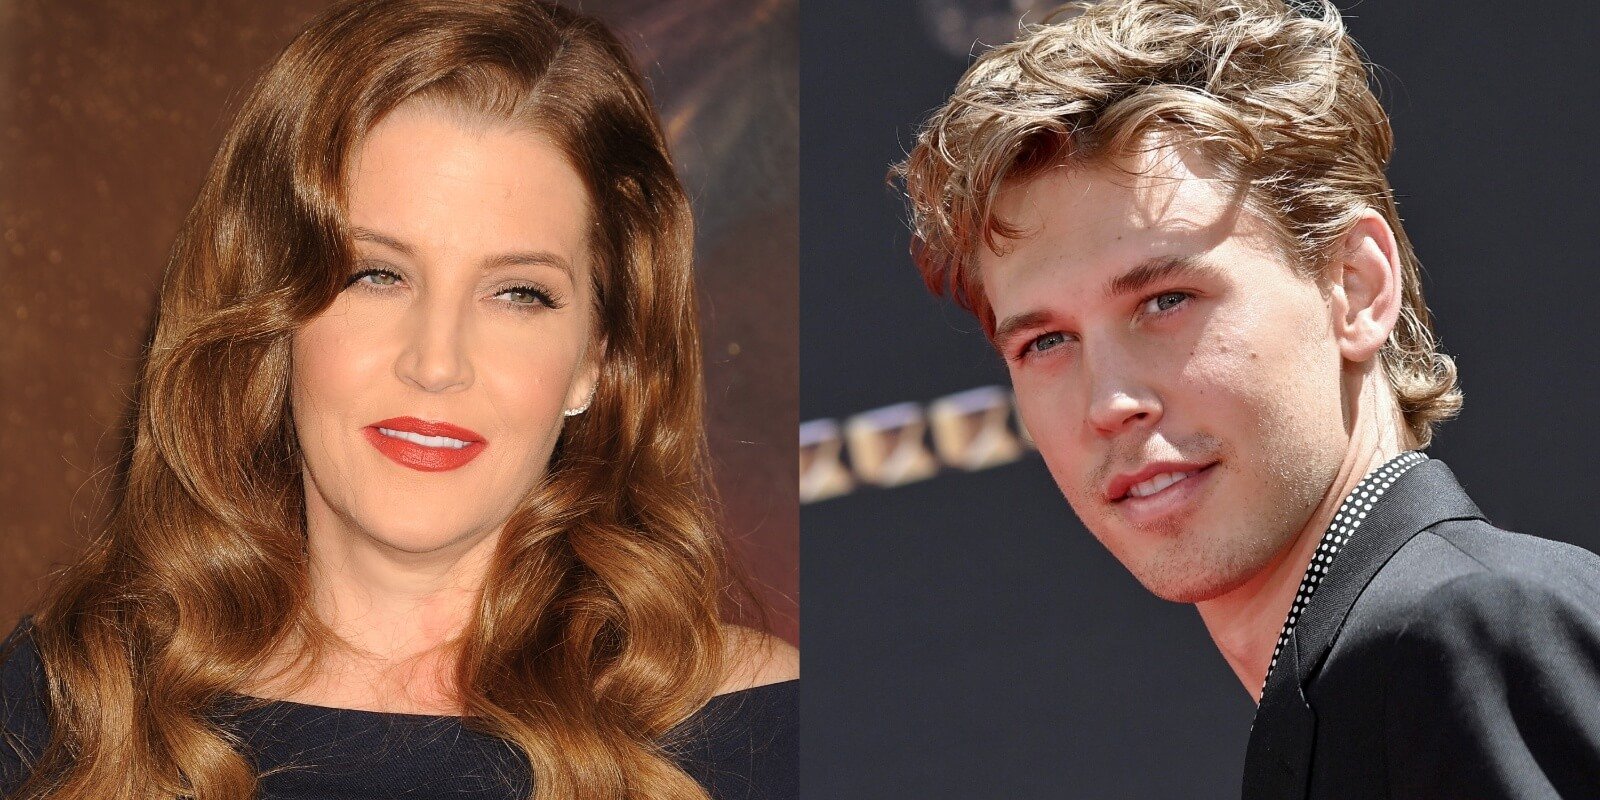 Lisa Marie Presley and Austin Butler in side by side photographs.